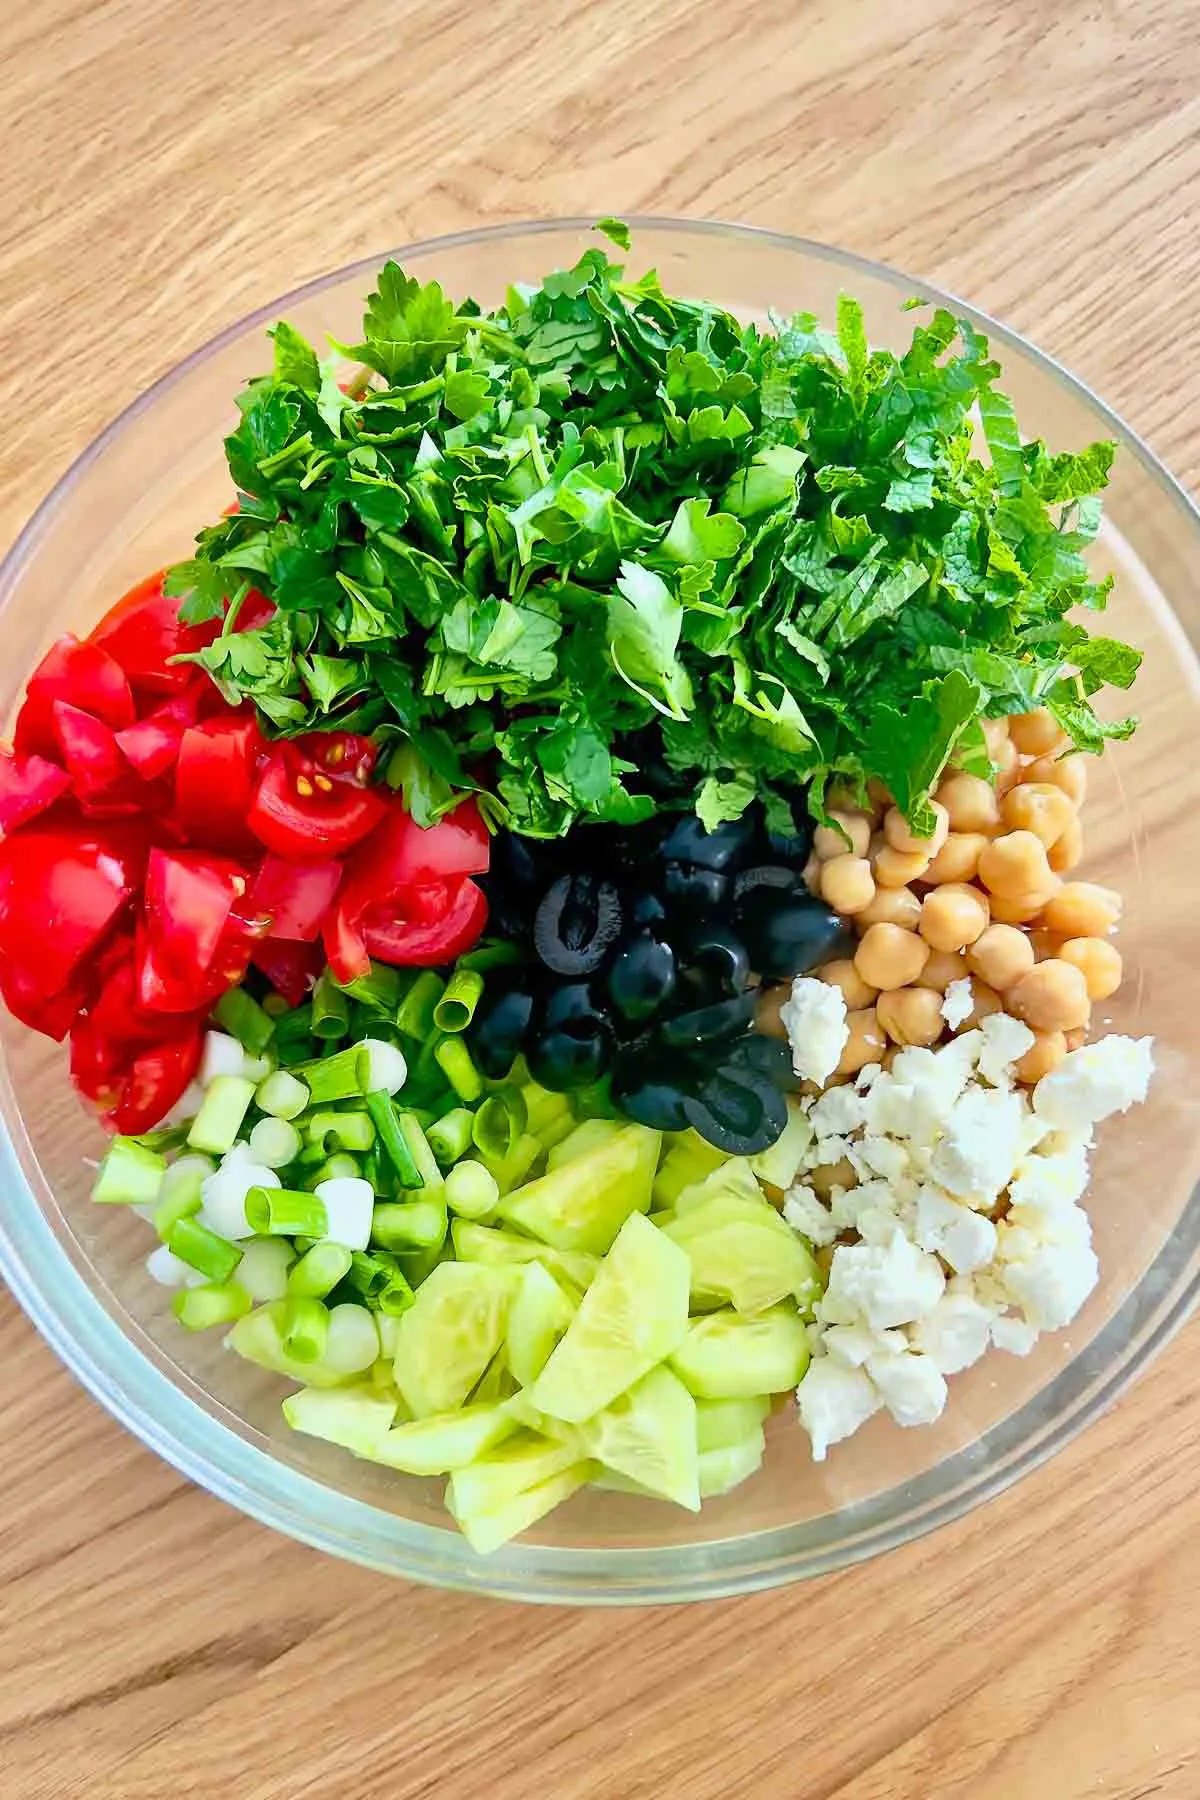 Chopped ingredients for the salad in a bowl.